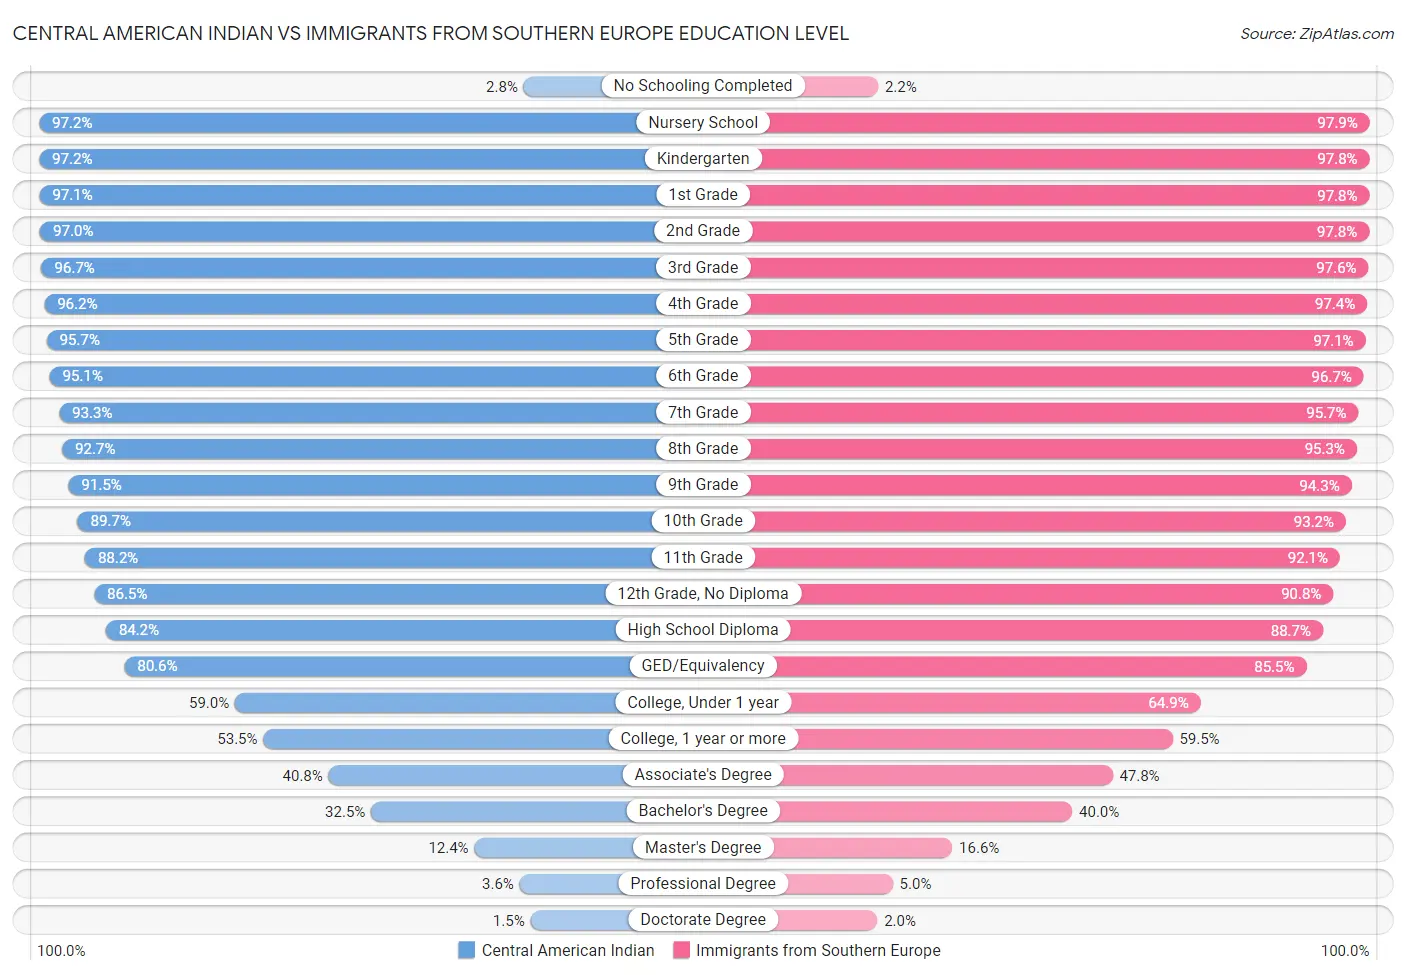 Central American Indian vs Immigrants from Southern Europe Education Level